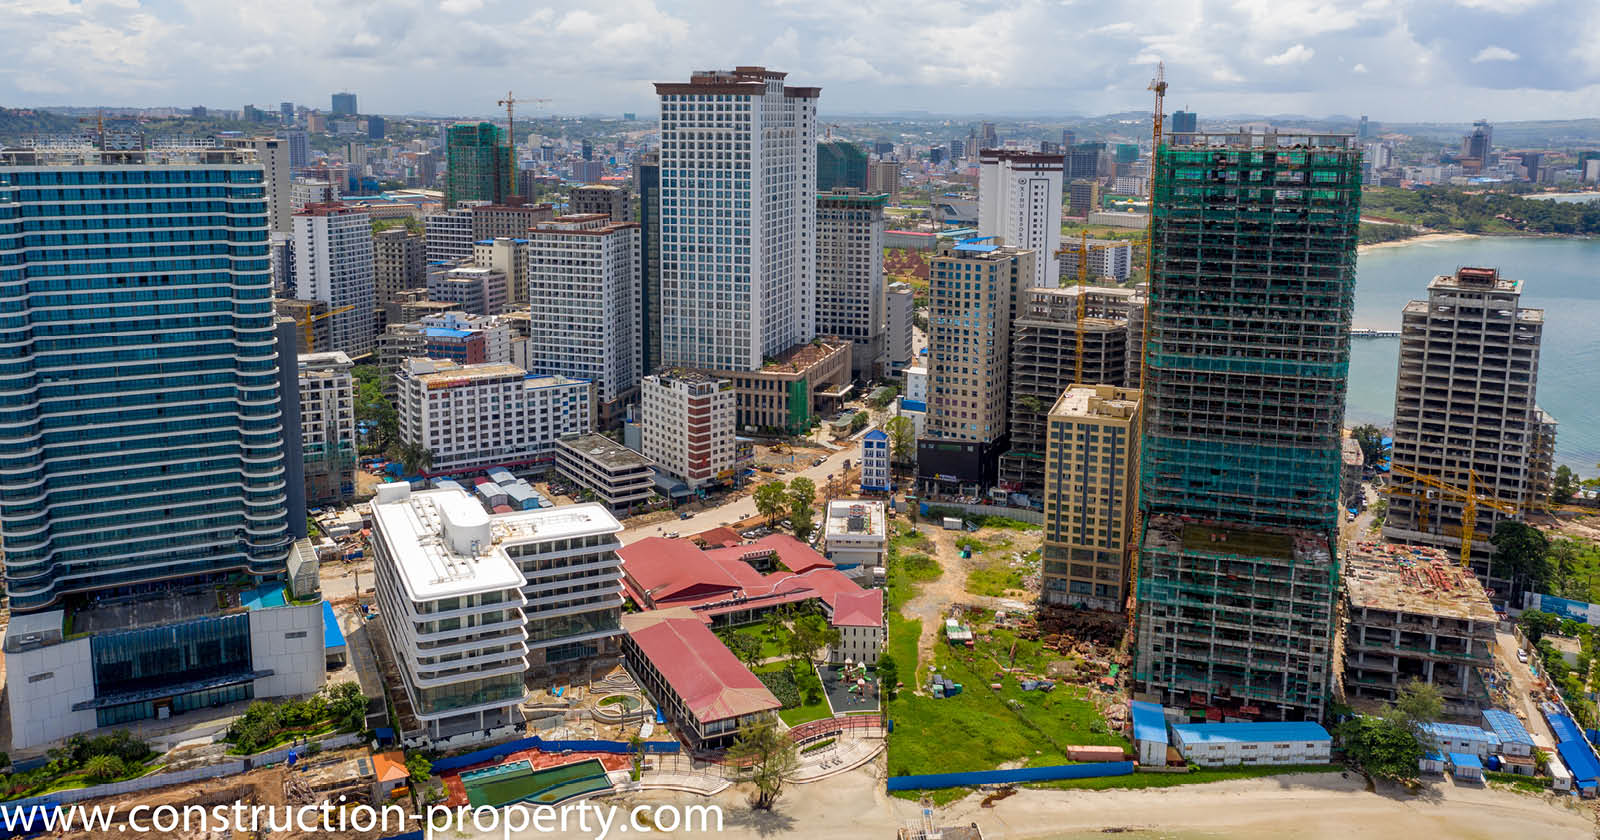 WB: Cambodia Must Closely Monitor Vulnerabilities from Prolonged Real Estate Boom and Associated Credit Spike